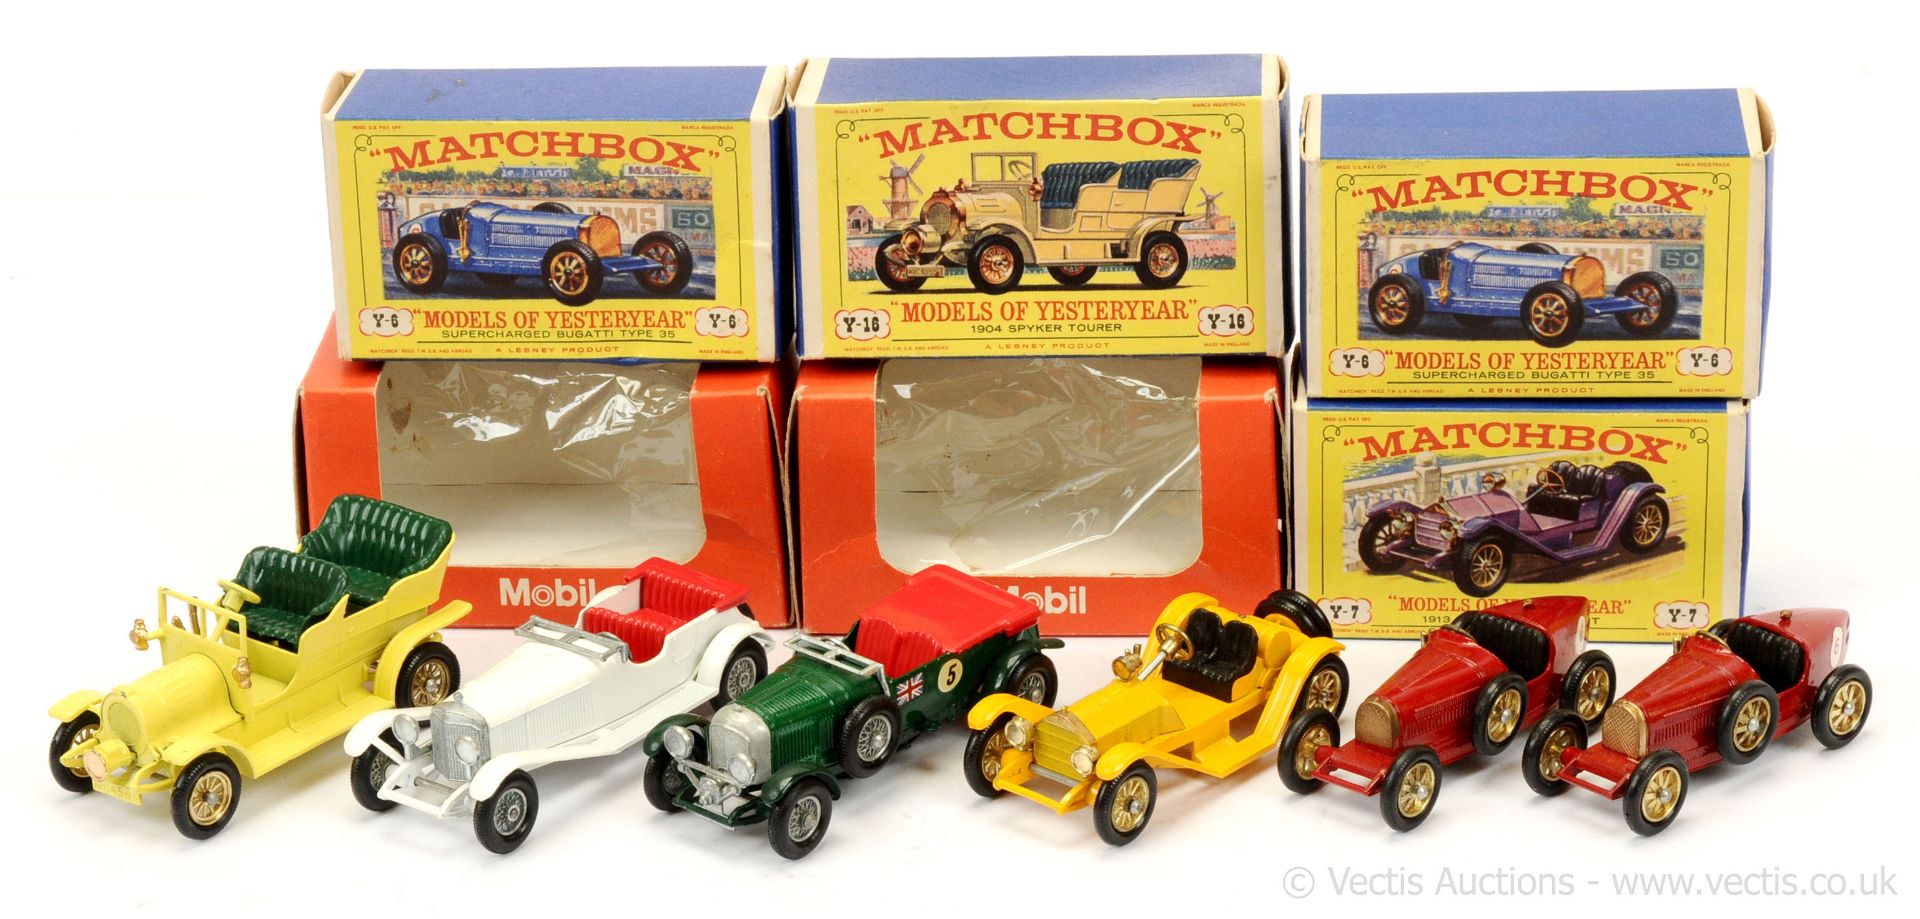 GRP inc Matchbox Models of Yesteryear Y5